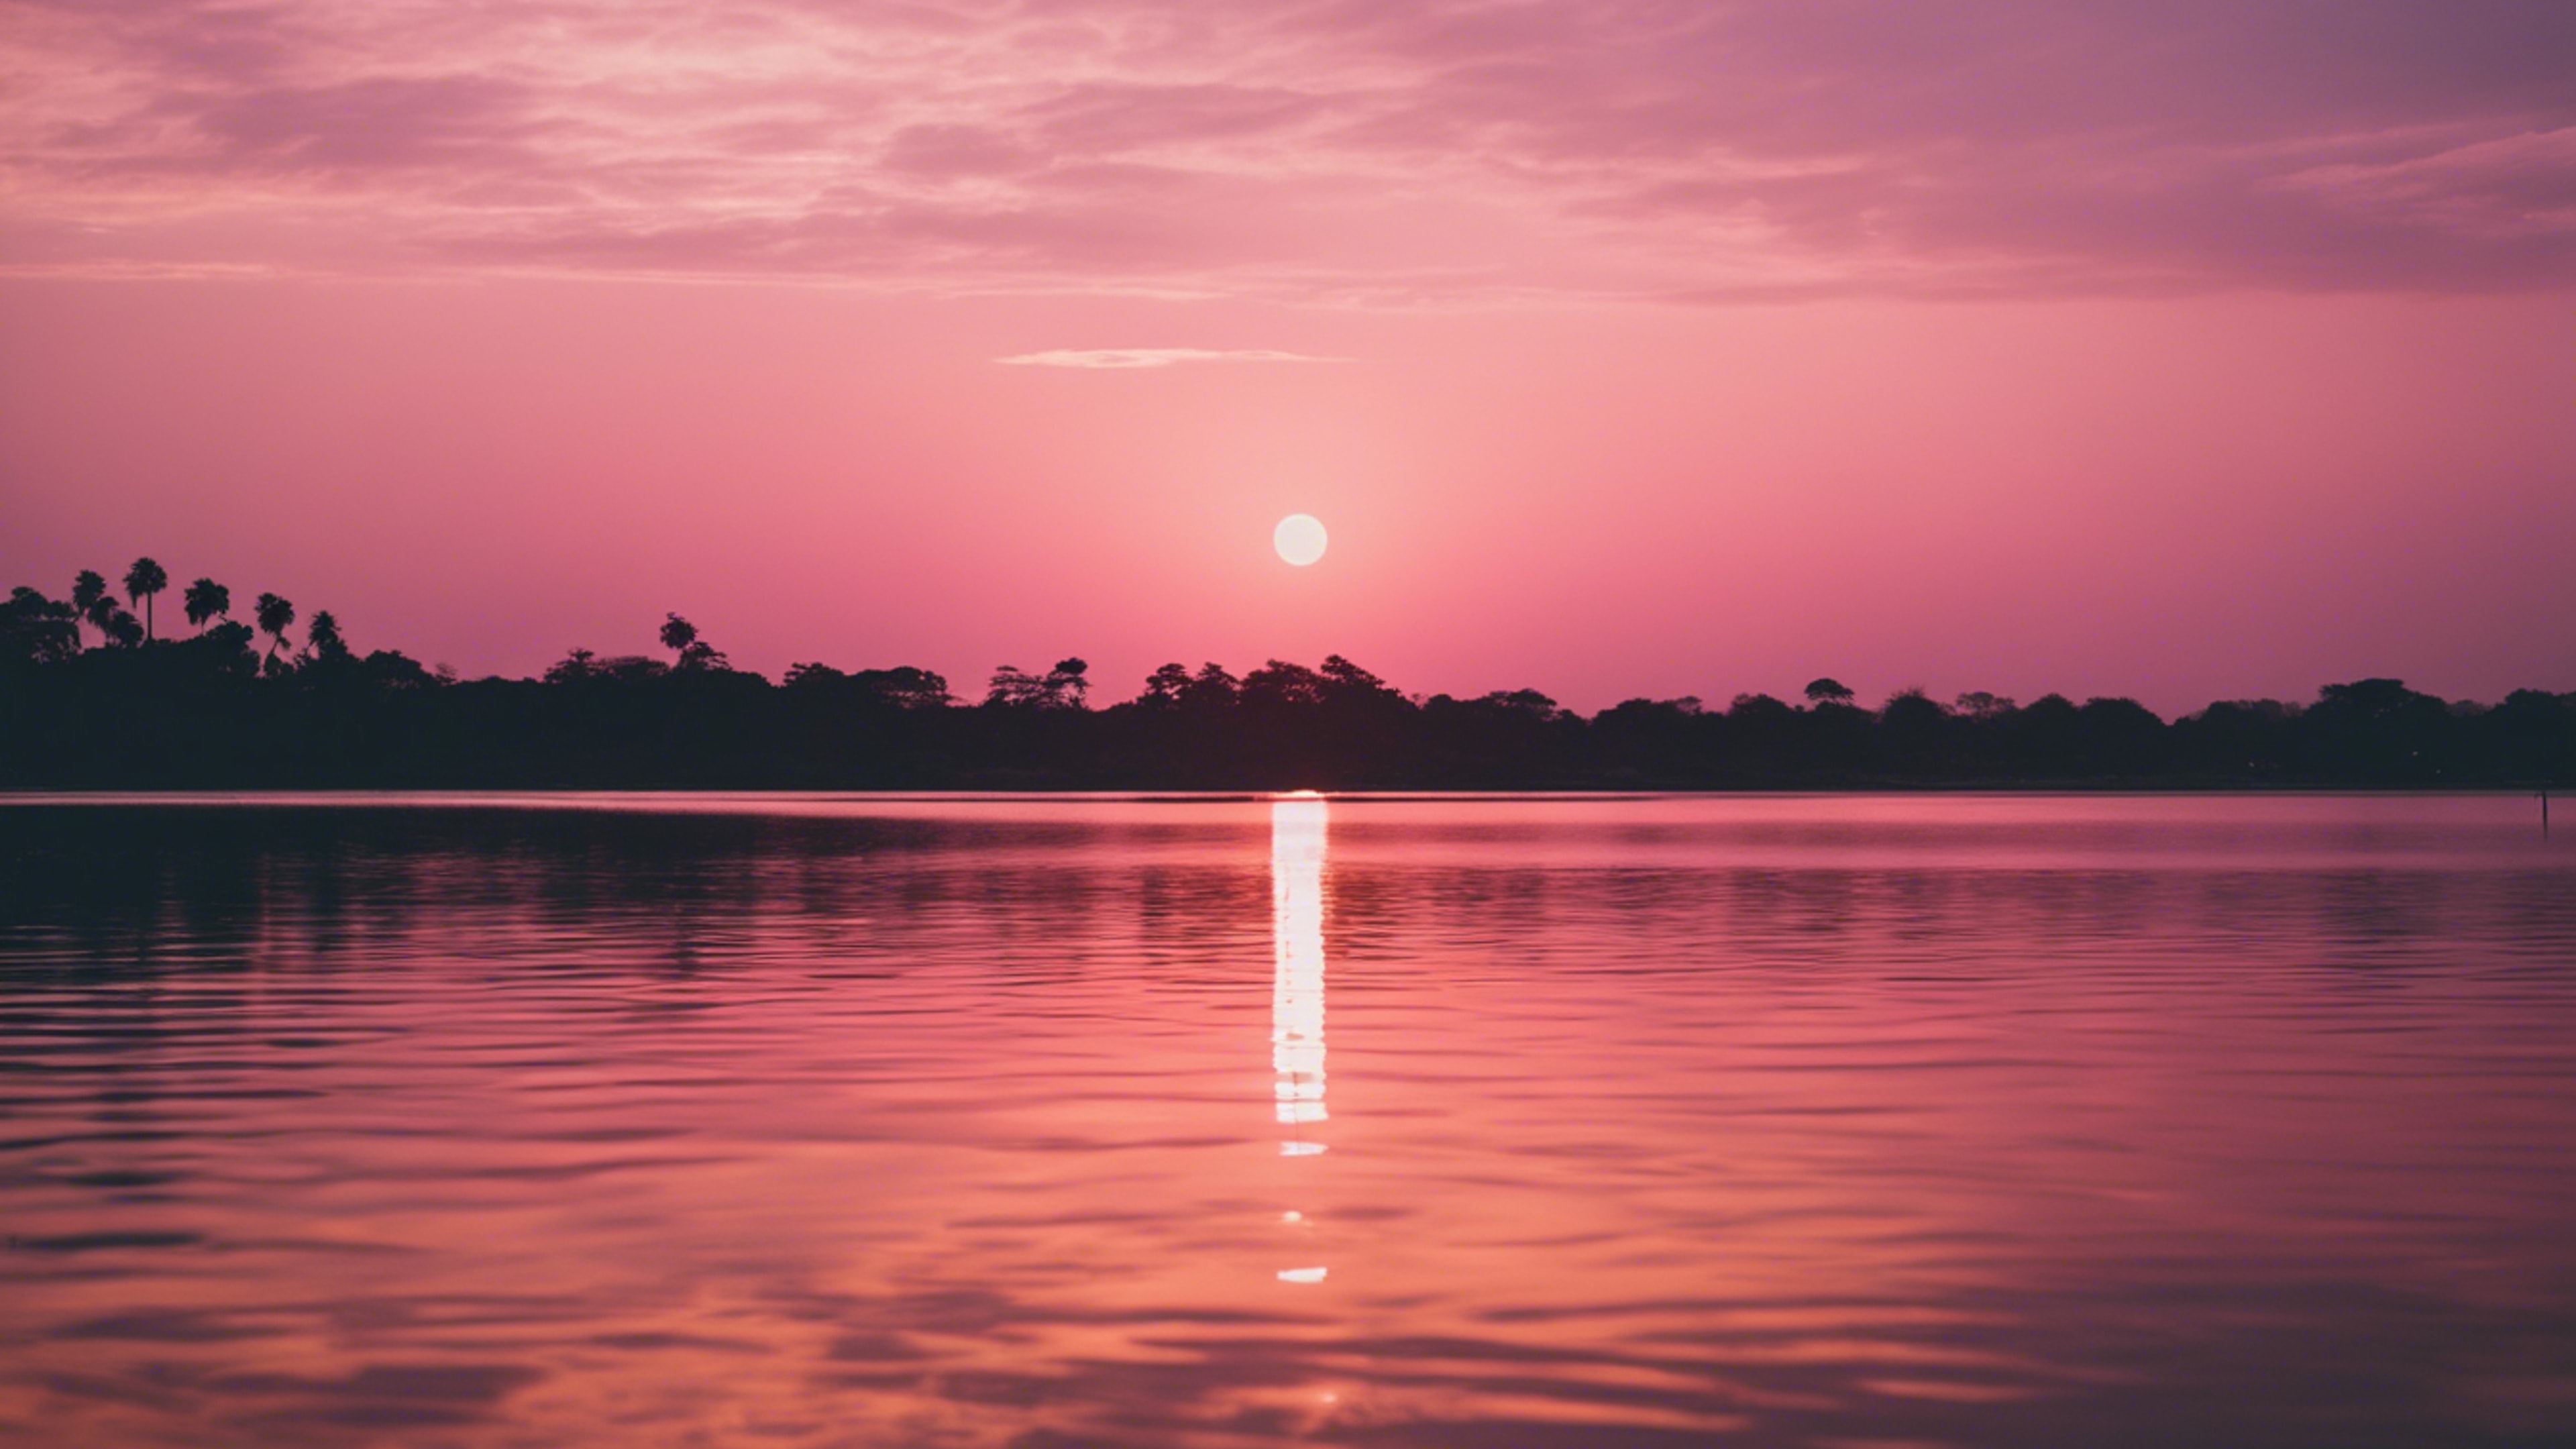 A picturesque pink and gold sunset reflecting on tranquil lagoon waters.壁紙[938883e46b5847a4931b]